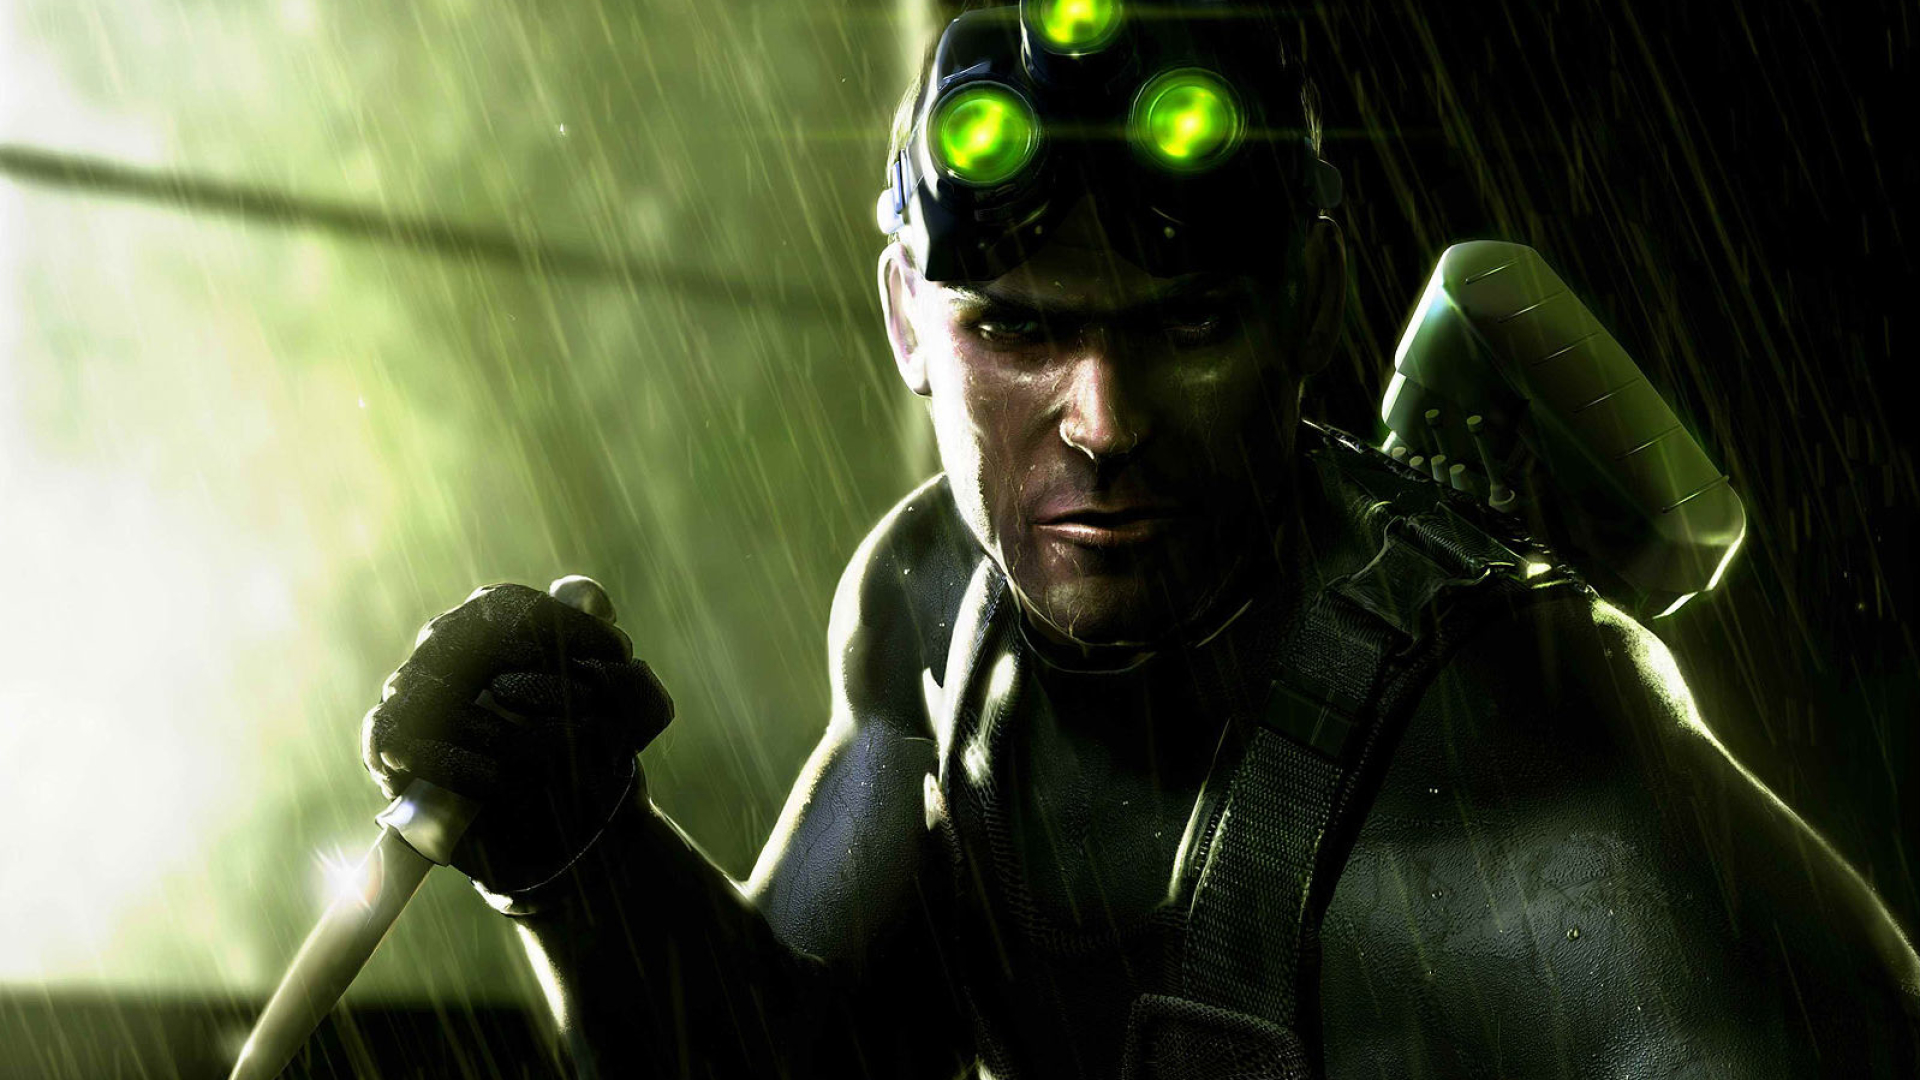 Tom Clancy's Splinter Cell: Chaos Theory (2005)